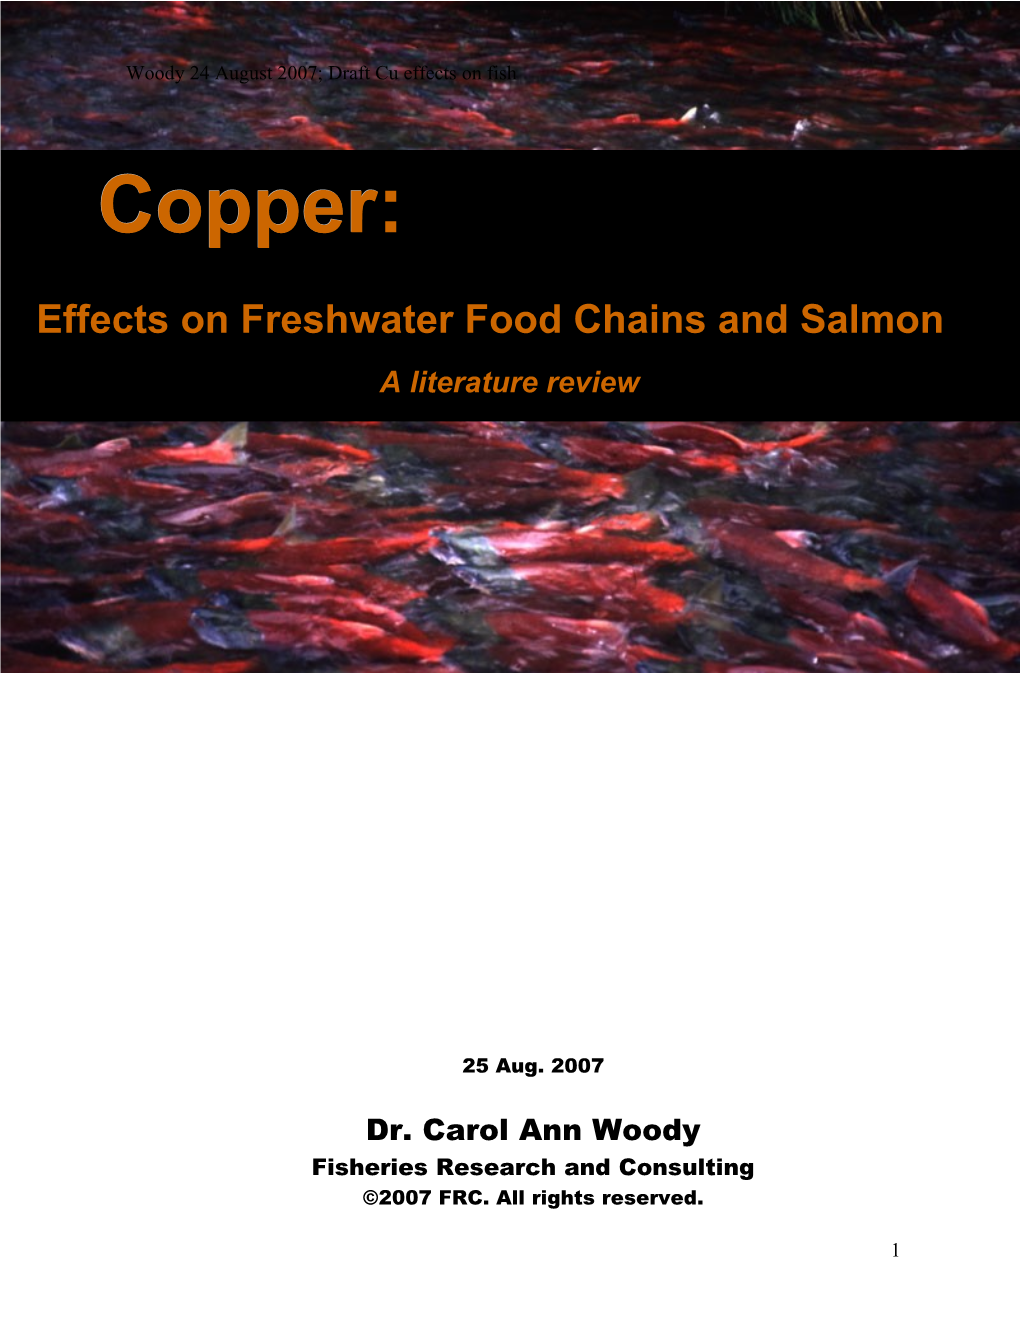 Copper: Acute and Chronic Impacts on Freshwater Fish